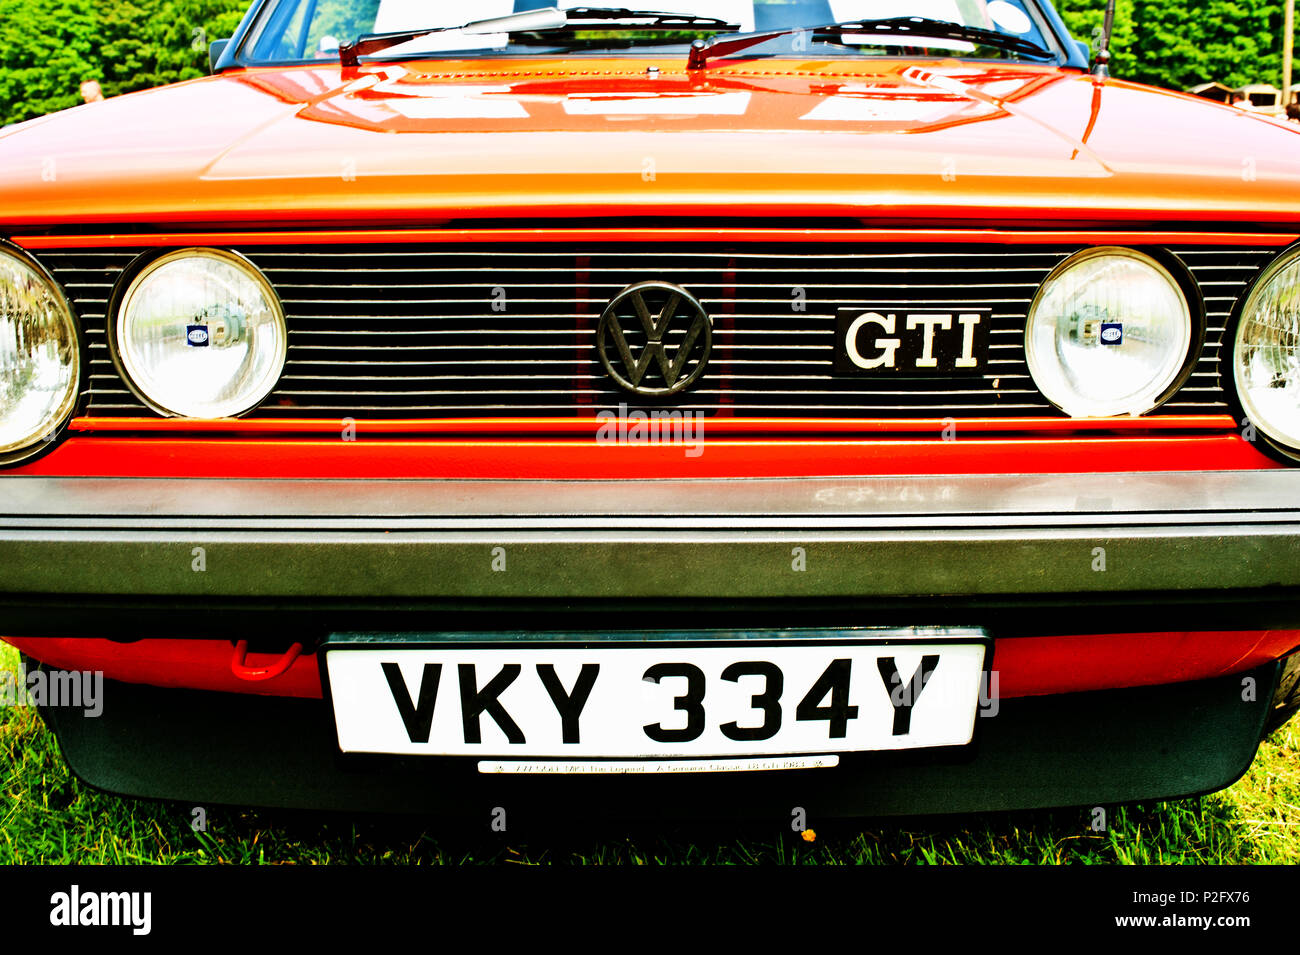 Golf gti mk1 hi-res stock photography and images - Alamy